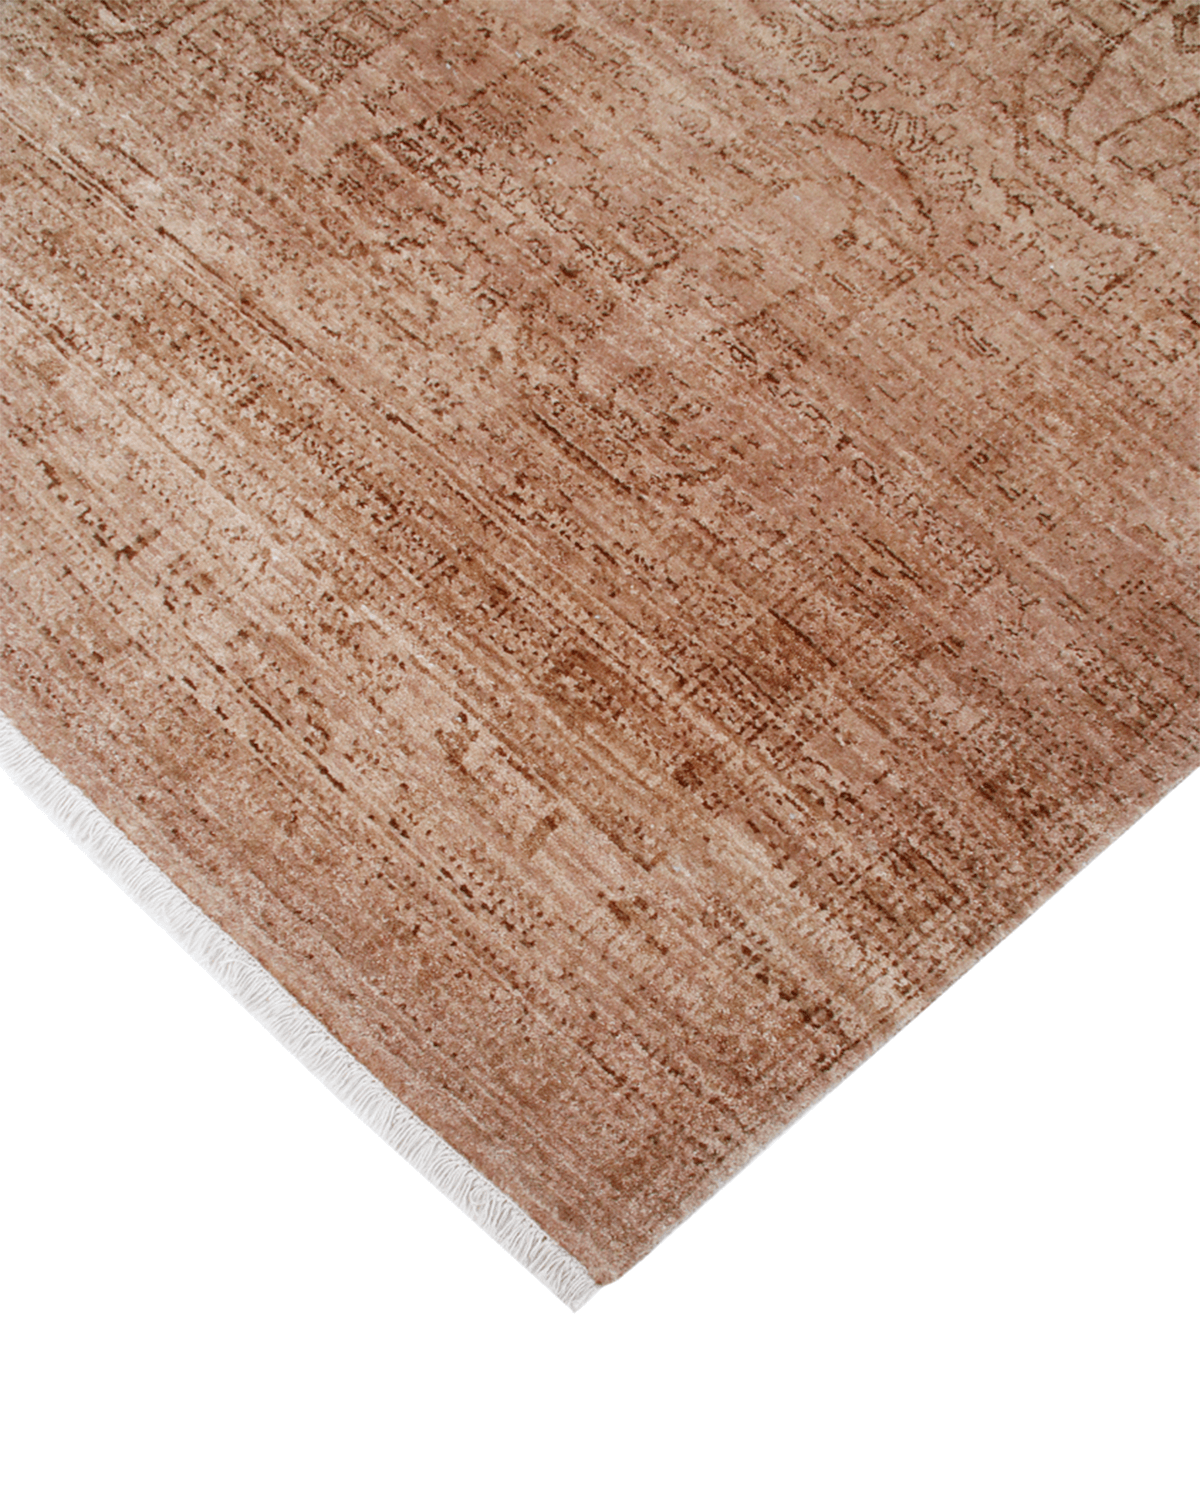 Hand-Knotted Transitional Rug (MRT-1-1)